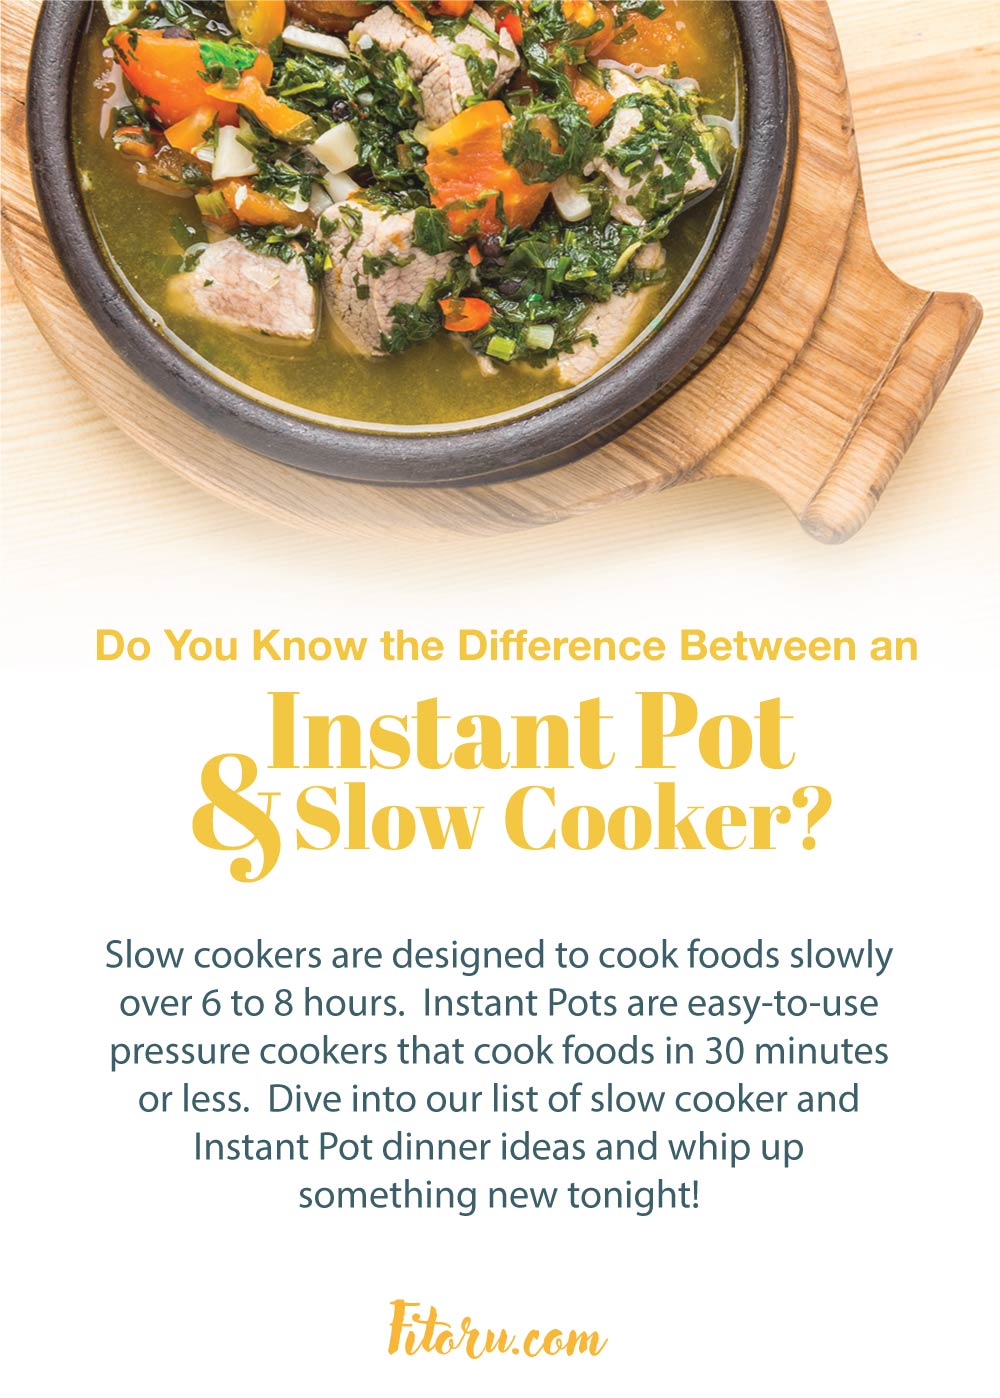 Do You Know the Difference Between an Instant Pot and a Slow Cooker?